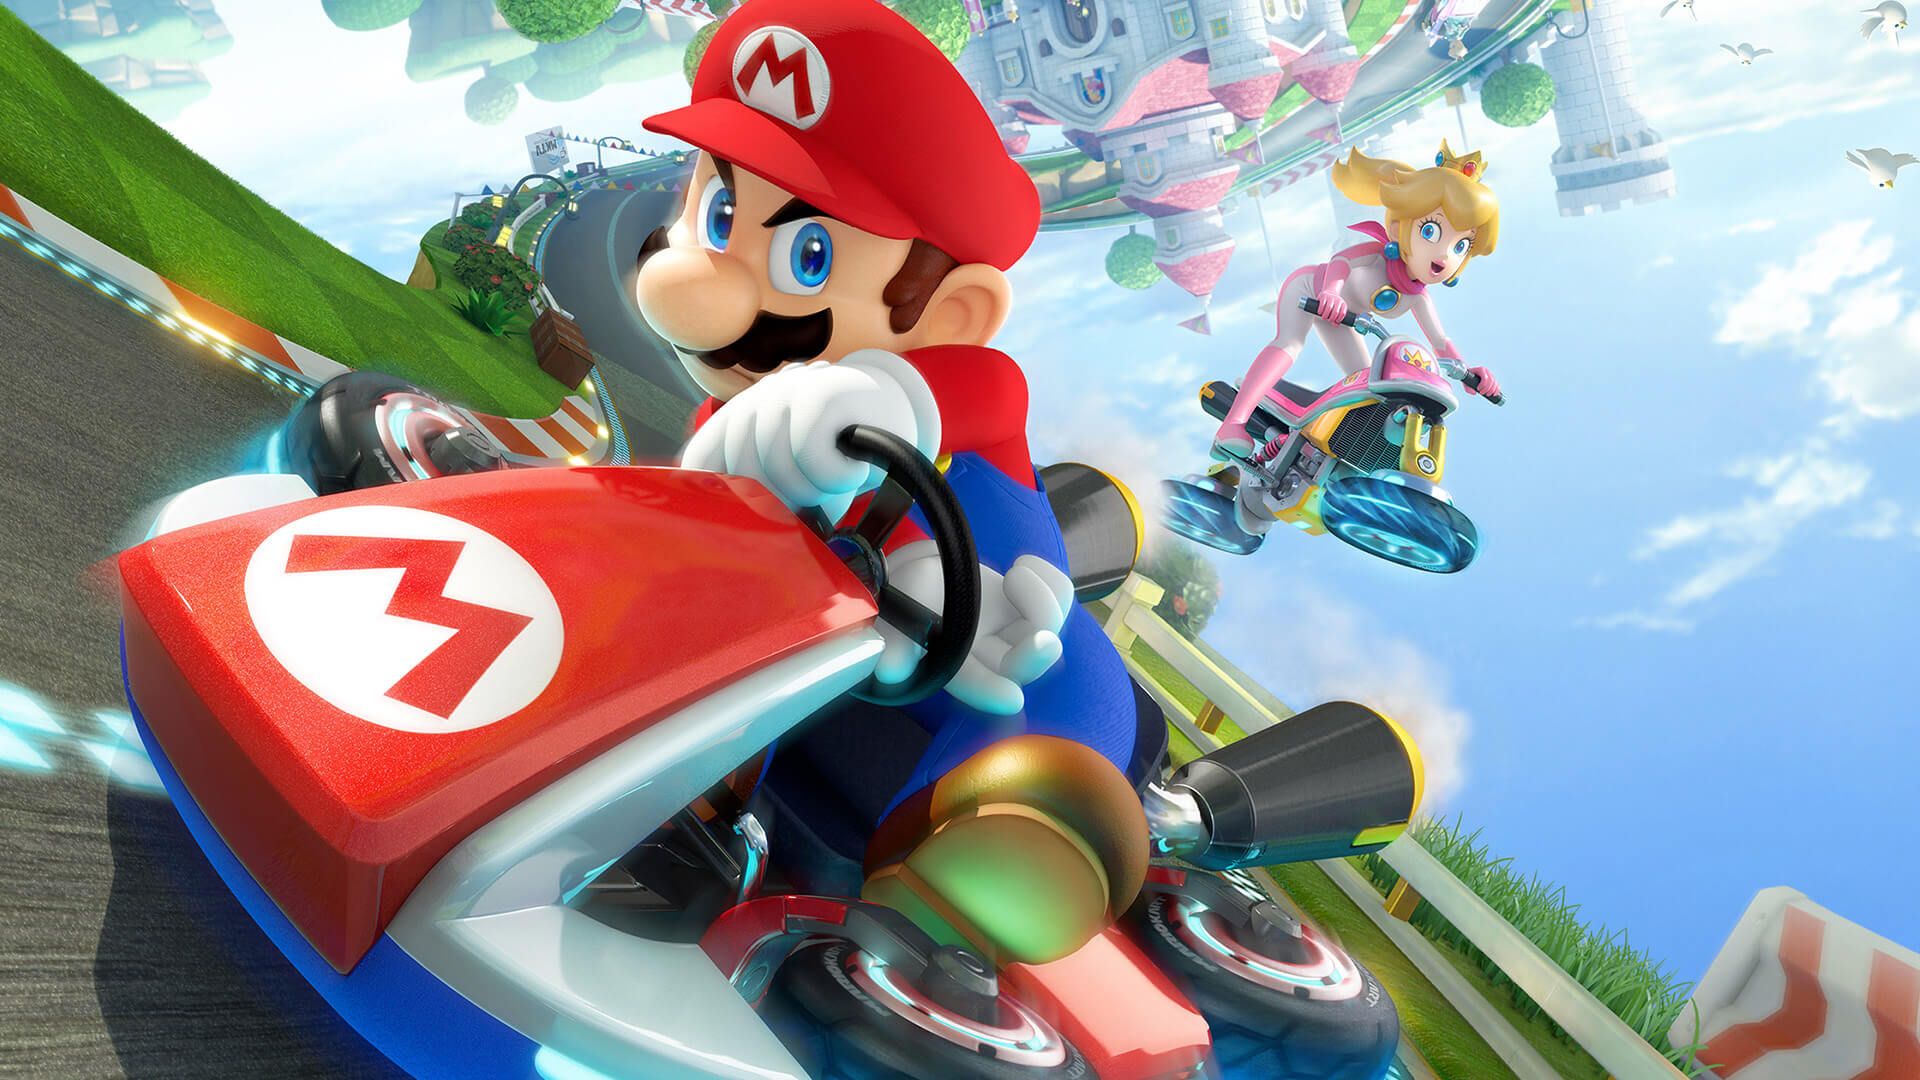 Best Local Multiplayer Games on Current Gen Systems - Mario Kart 8 Mario and Peach